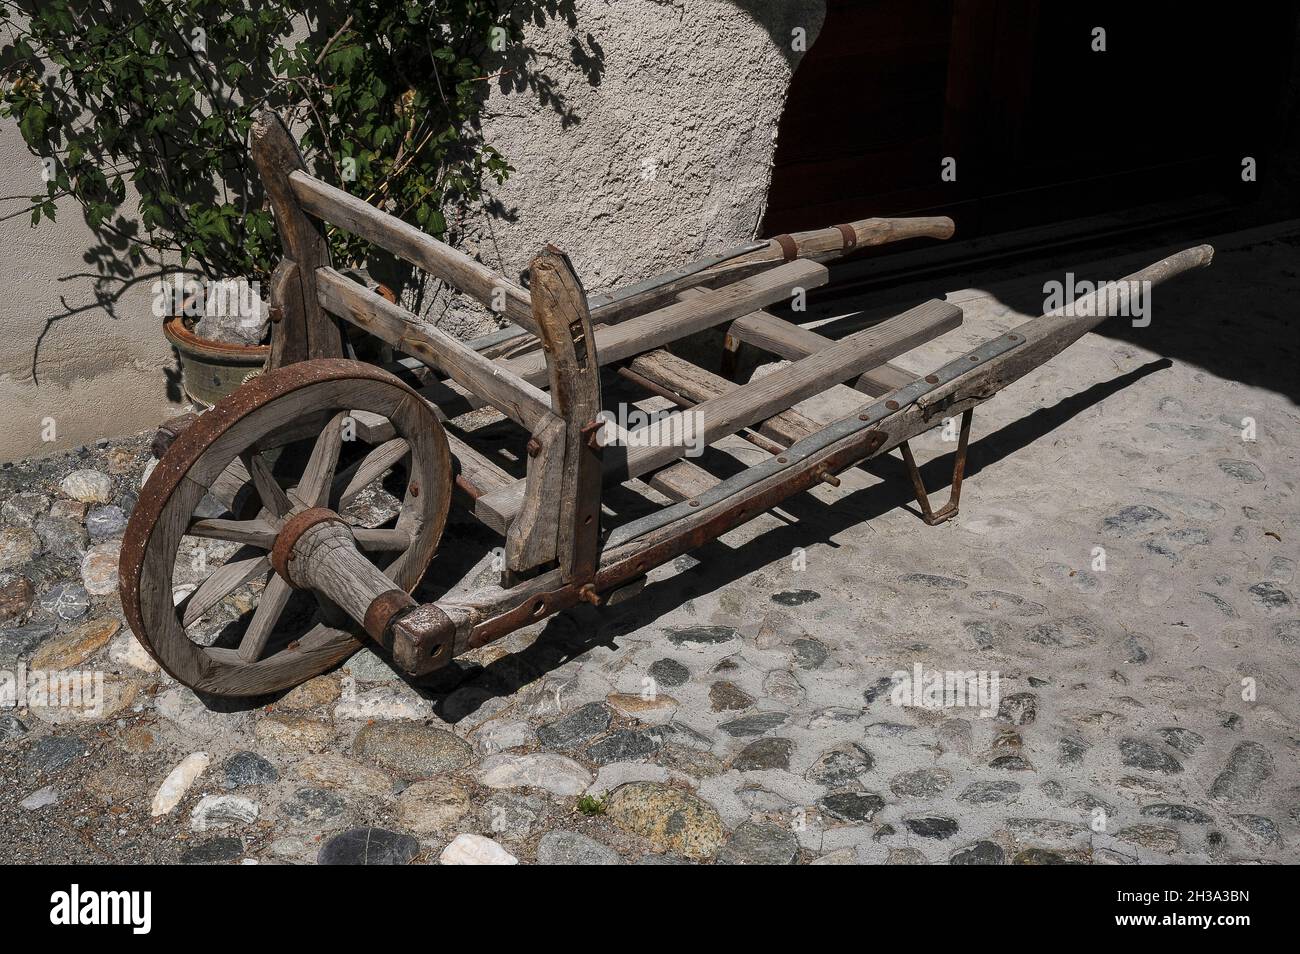 An antique or vintage wooden sack truck or sack barrow, with a timber axle and a single wheel bound by an iron tyre, rests on a sunlit cobbled path in the historic Romansh-speaking village of Ardez, in the Lower Engadine Valley in Graubünden or Grisons canton, eastern Switzerland. Stock Photo